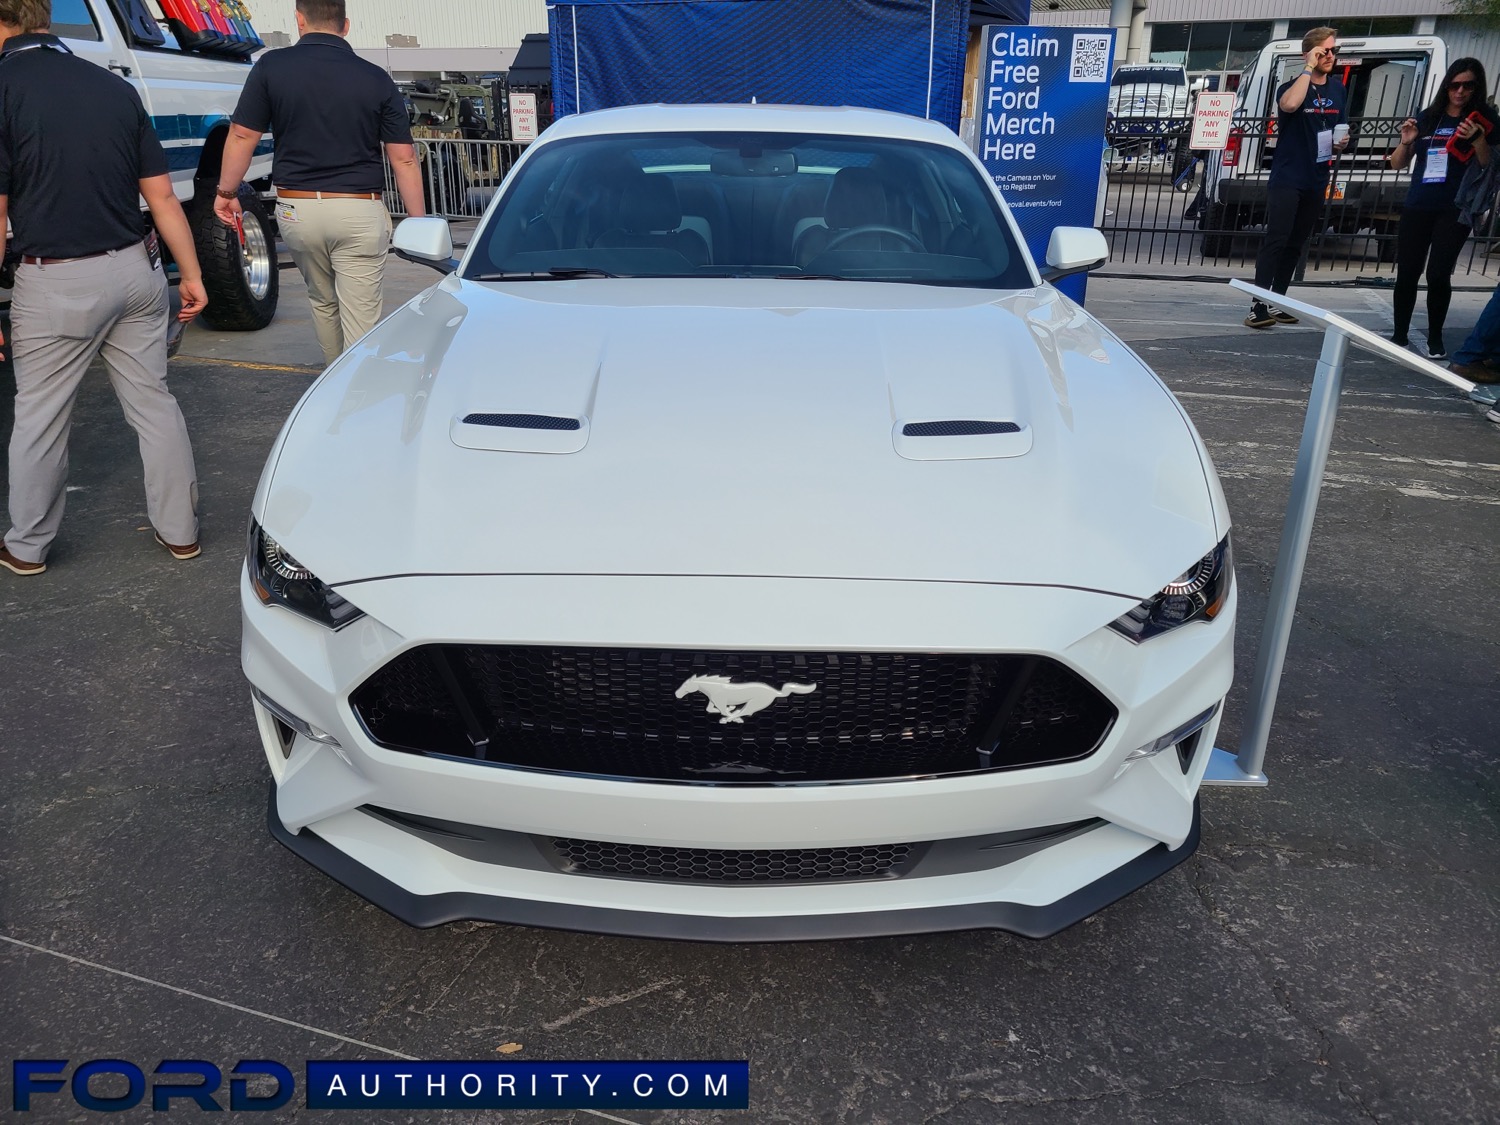 https://fordauthority.com/wp-content/uploads/2021/12/2022-Ford-Mustang-GT-Premium-Ice-White-Edition-Apperance-Package-2021-SEMA-Live-Photos-Exterior-001-front-Oxford-White-Mustang-logo-on-grille.jpg